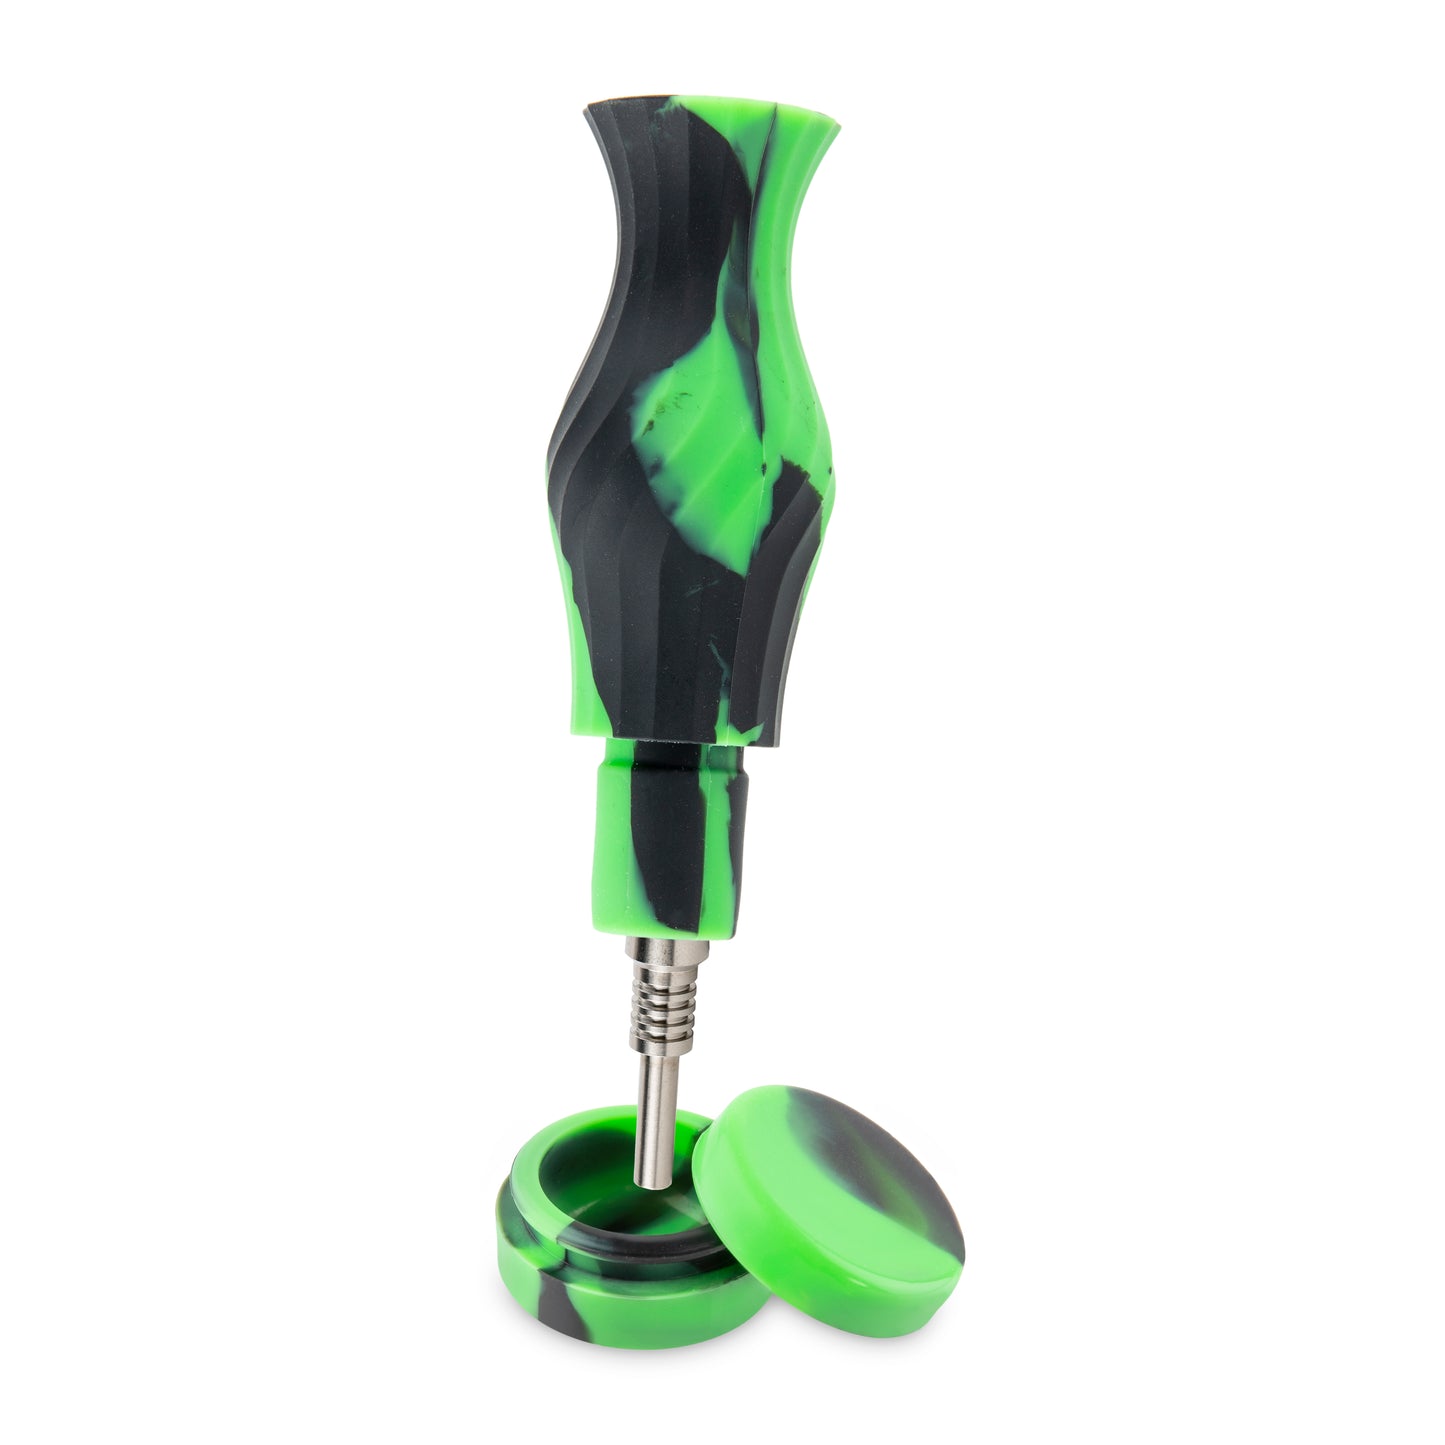 Ooze Ozone Silicone Water Pipe, Dab Rig & Dab Straw - Chameleon